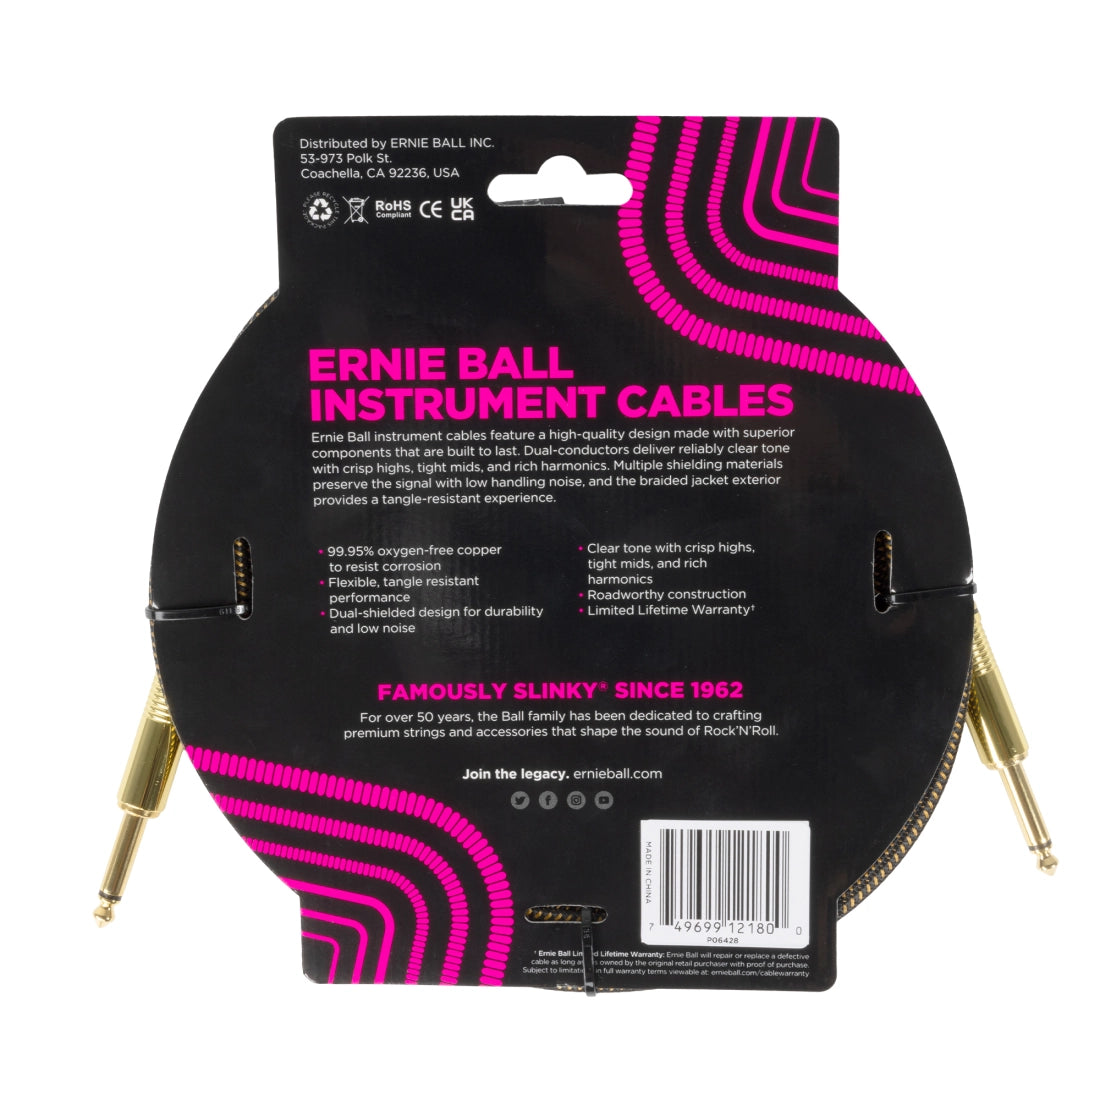 Ernie Ball 10ft Braided Instrument Cable - Pay Dirt - Joondalup Music Centre